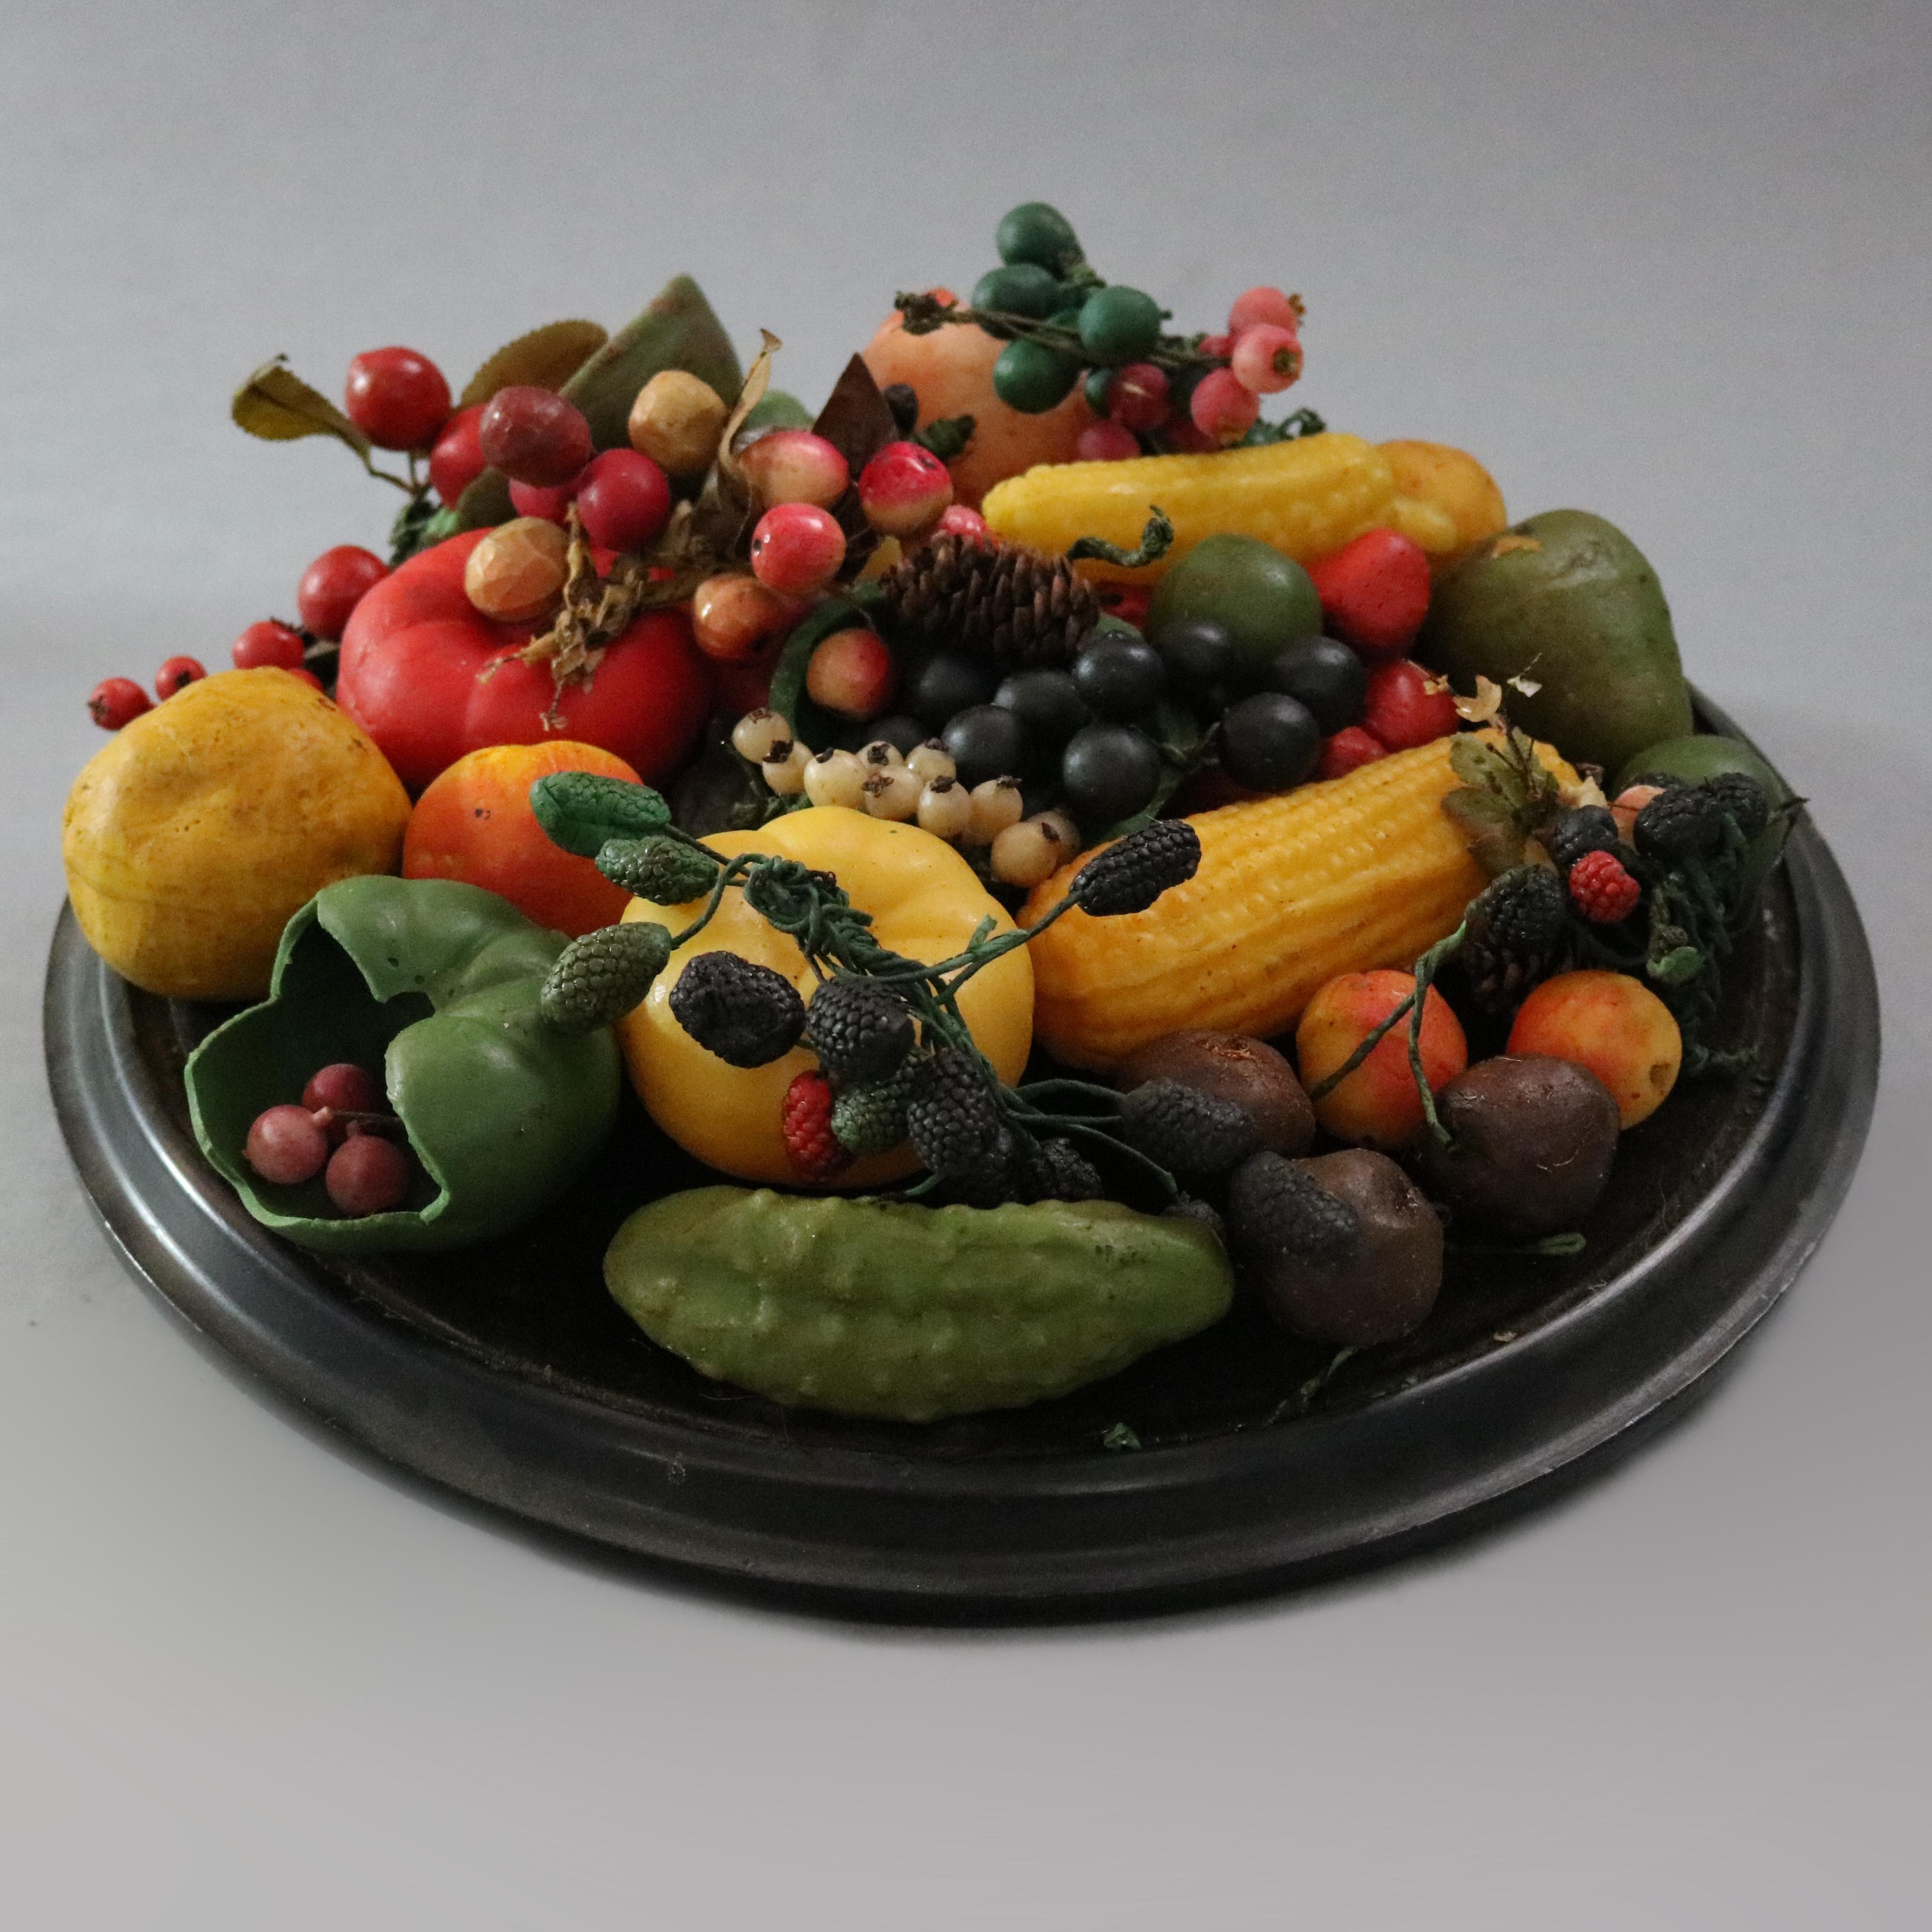 An antique Victorian still life arrangement offers a variety of loose wax fruits displayed on wood base under glass dome, circa 1880

Measures: 8.75